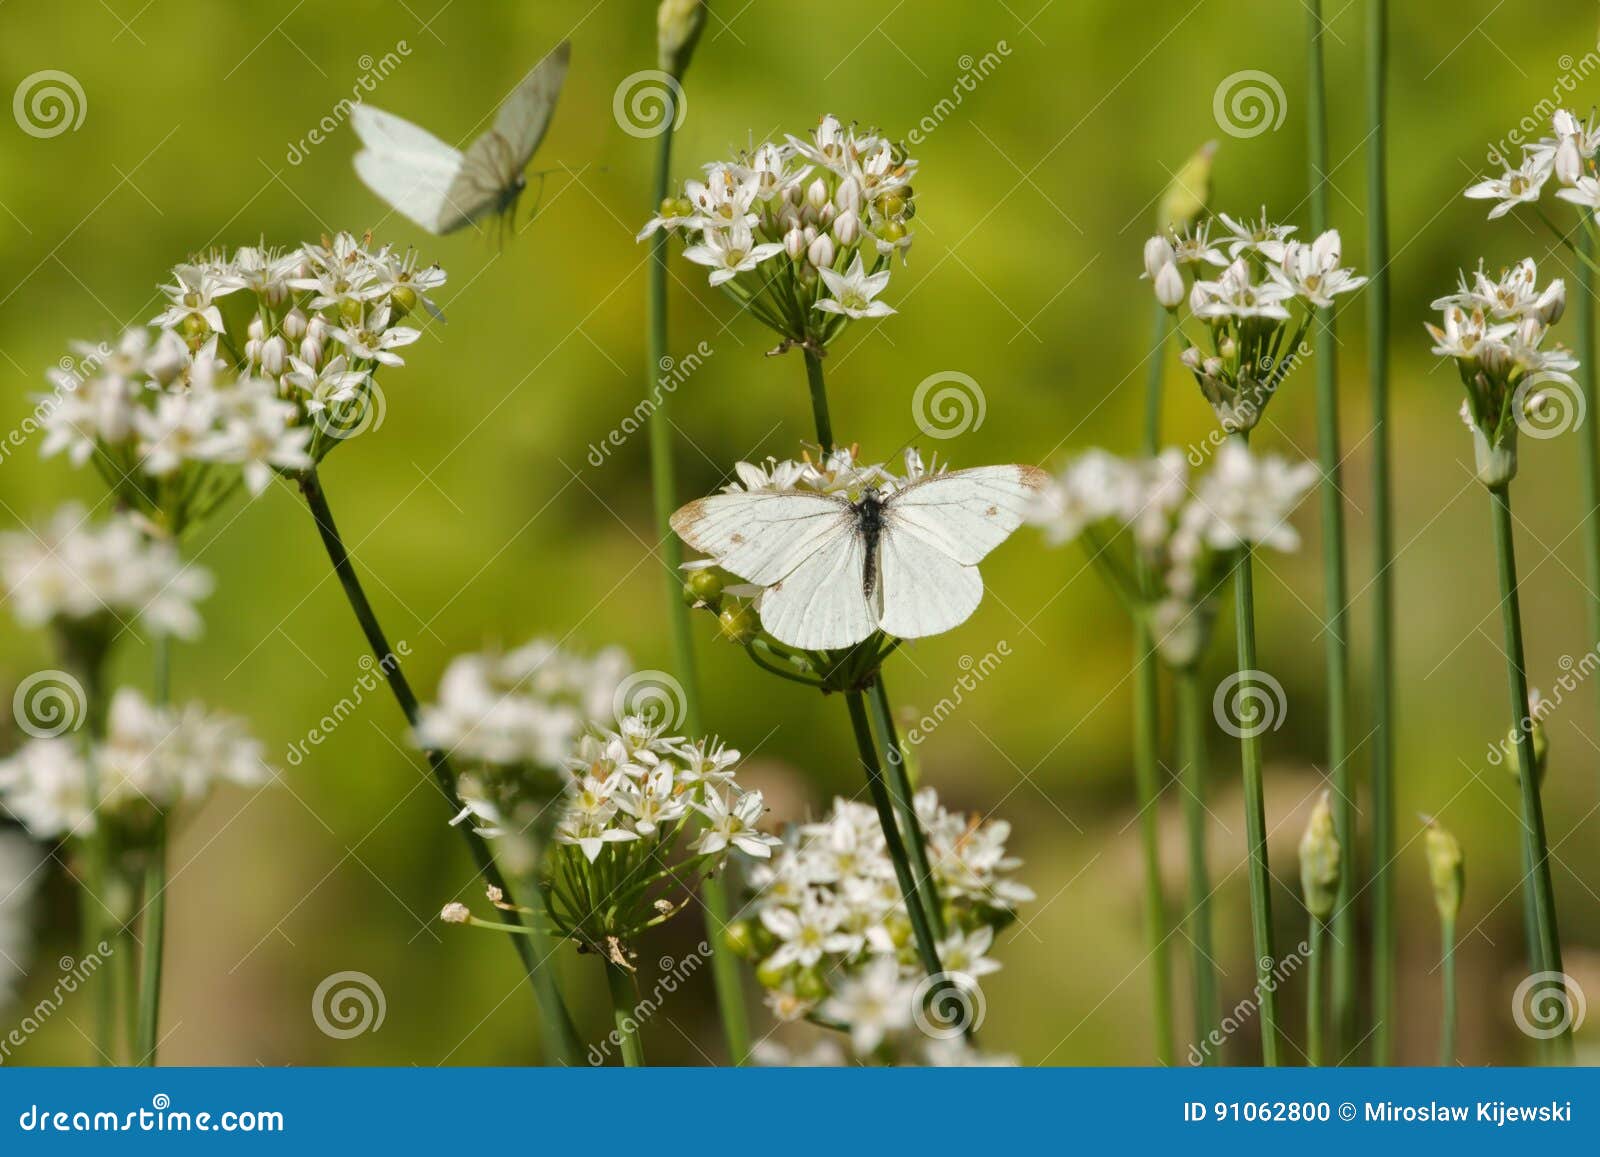 butterflies pieridae, white insects on white flowers of garlic